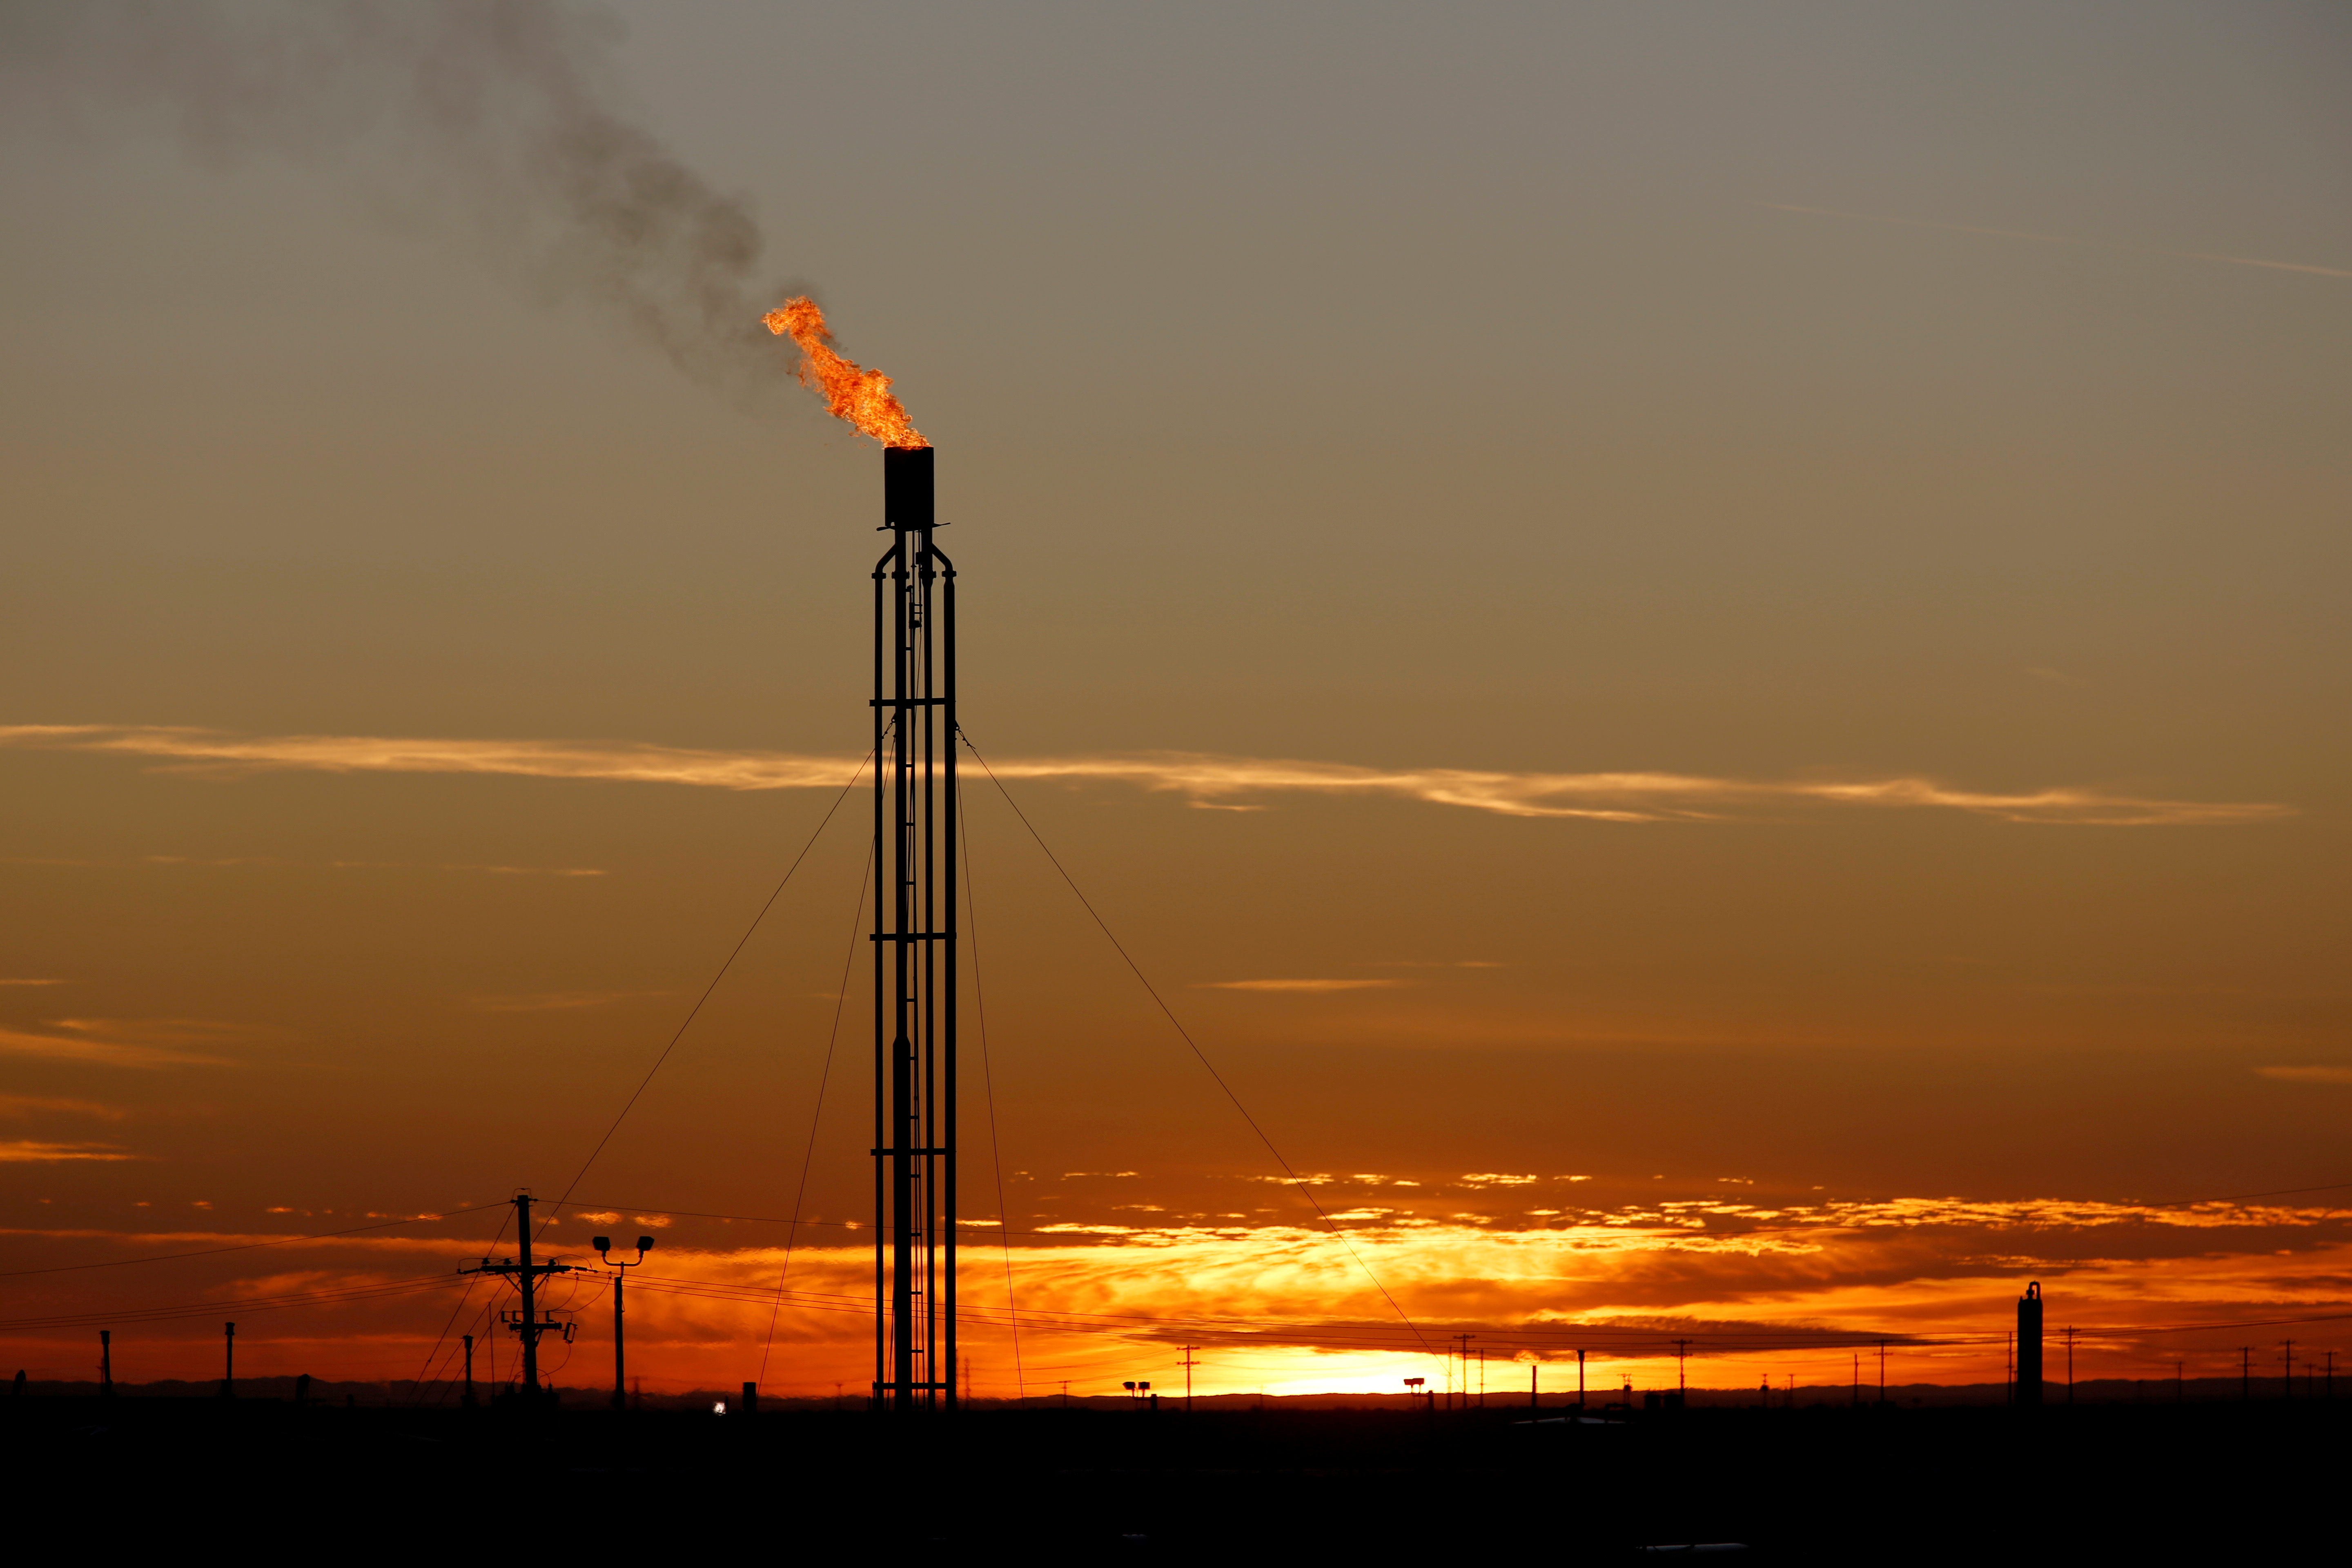 A flare burns excess natural gas in the Permian Basin in Loving County, Texas, U.S. November 23, 2019. Picture taken November 23, 2019. REUTERS/Angus Mordant//File Photo